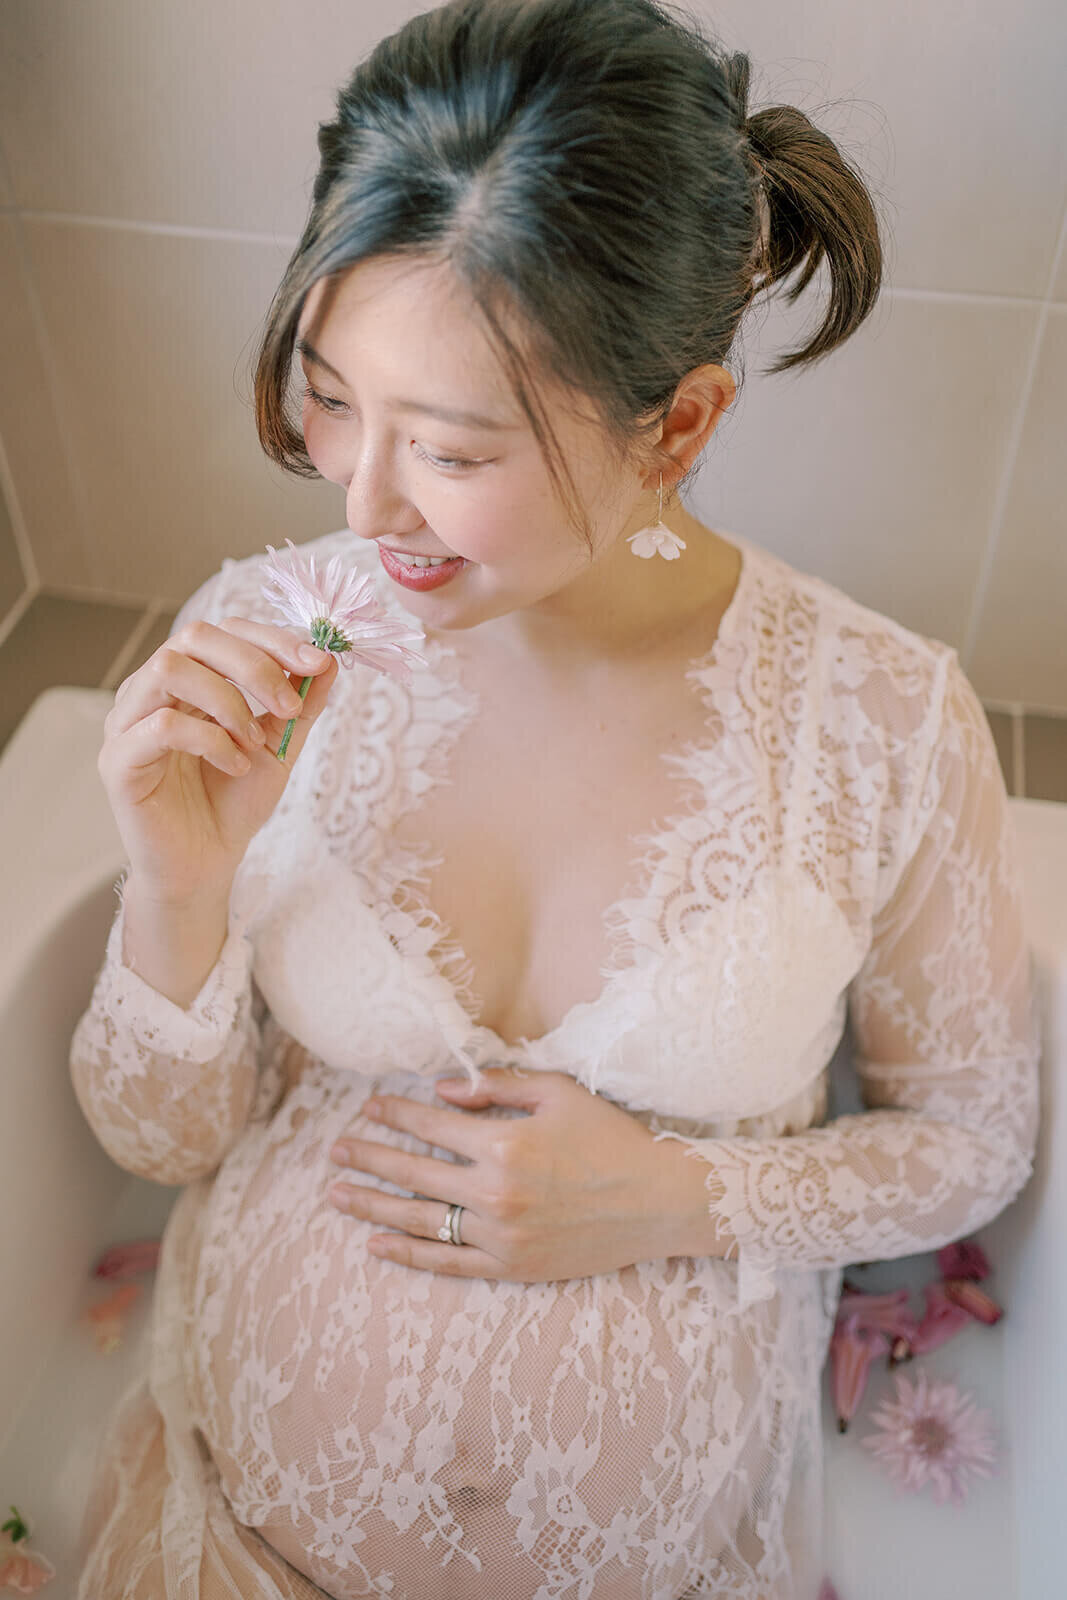 Radiating grace, a Chinese descent mum in a lace white gown captures the magic of pregnancy at a Gold Coast milk bath maternity shoot